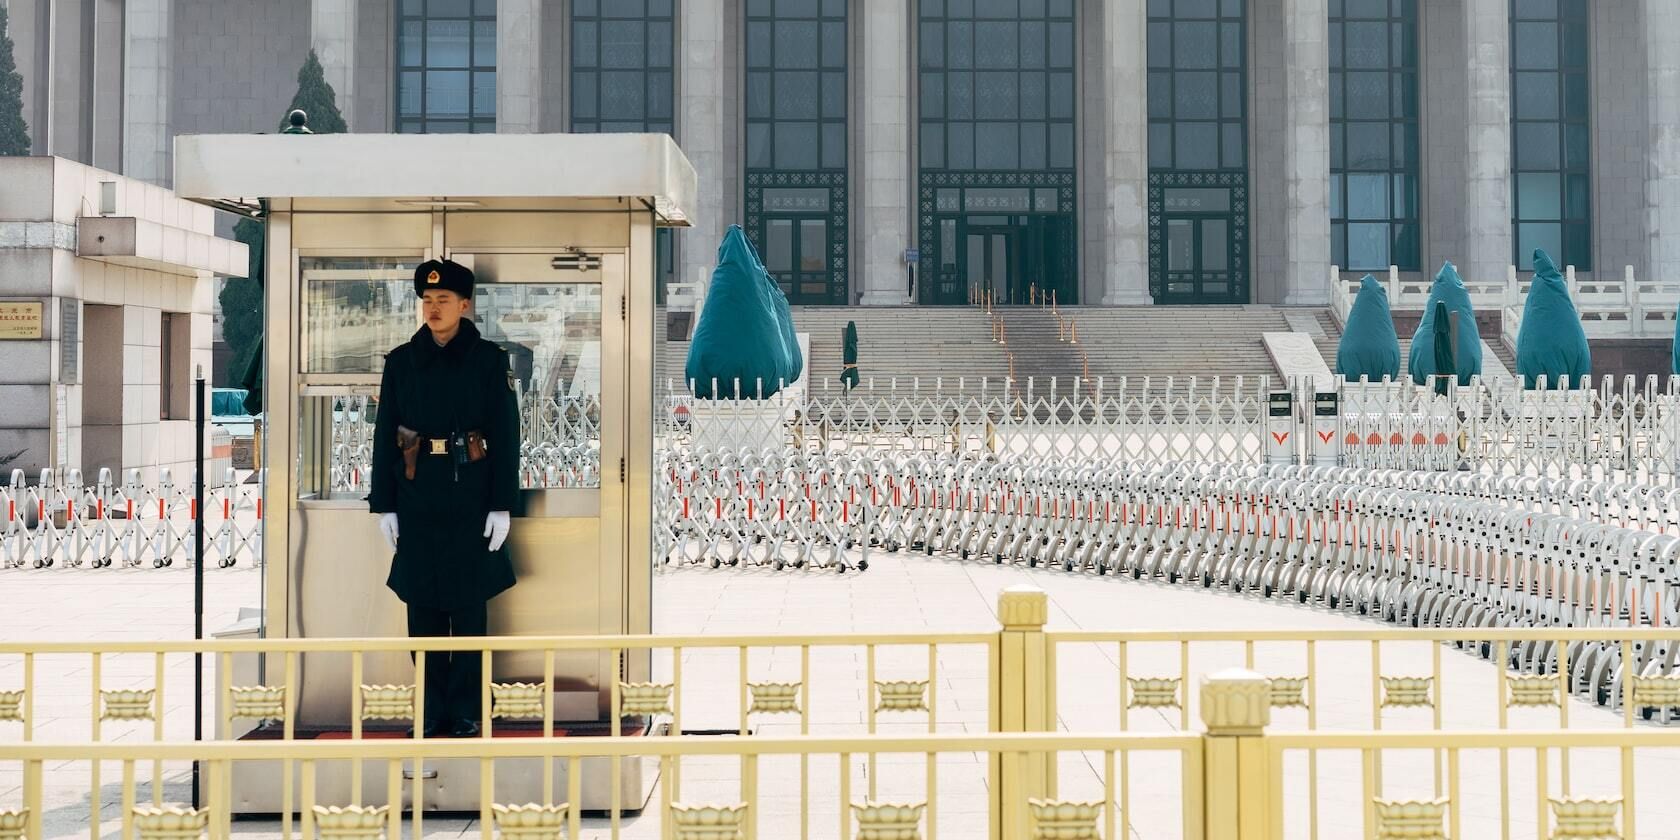 Guard stands outside a government agency in Beijing